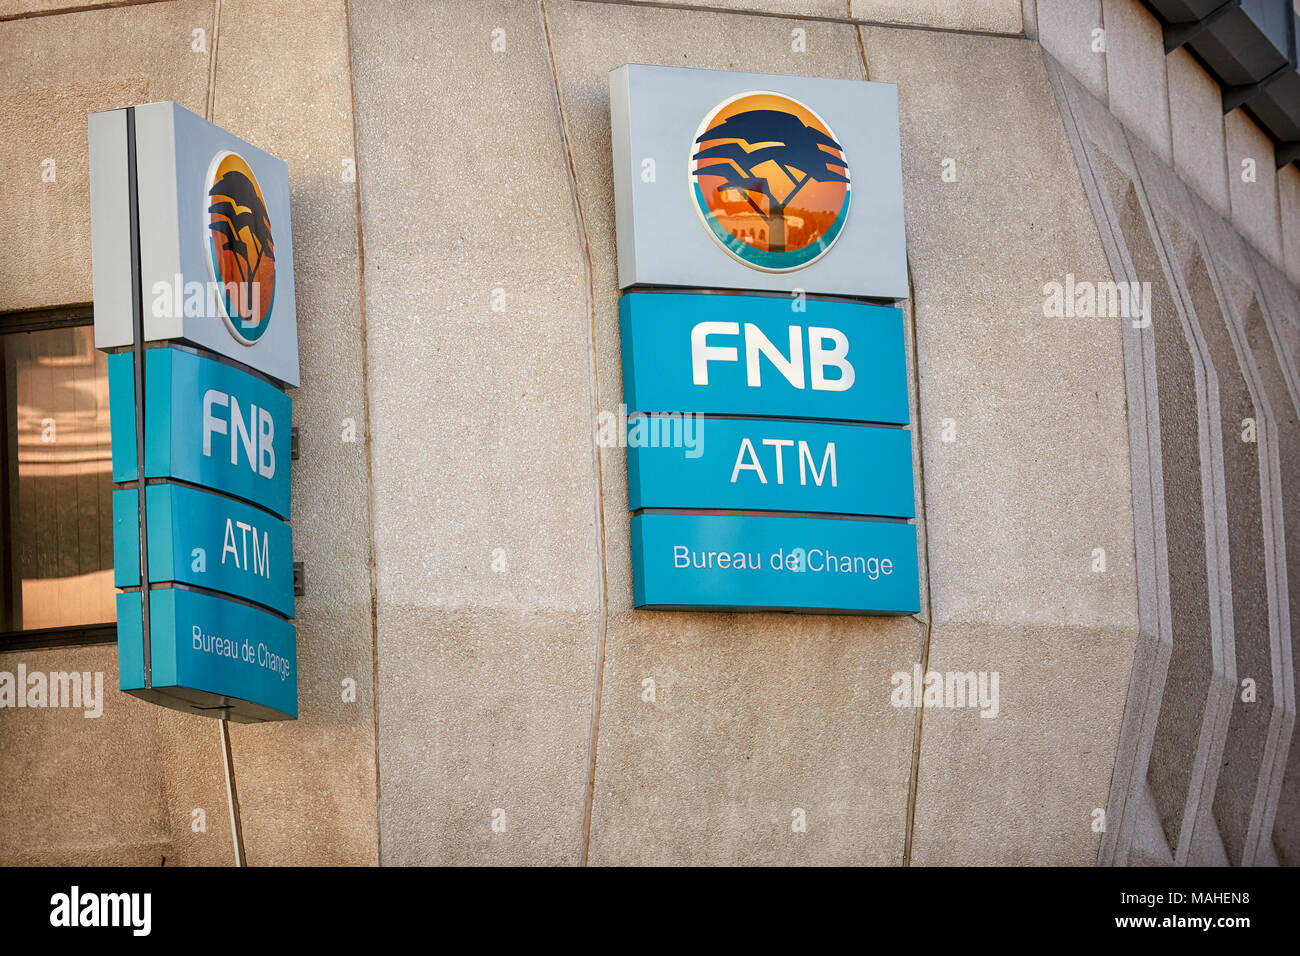 First National Bank (FNB) building, Windhoek, Namibia, Africa Stock Photo